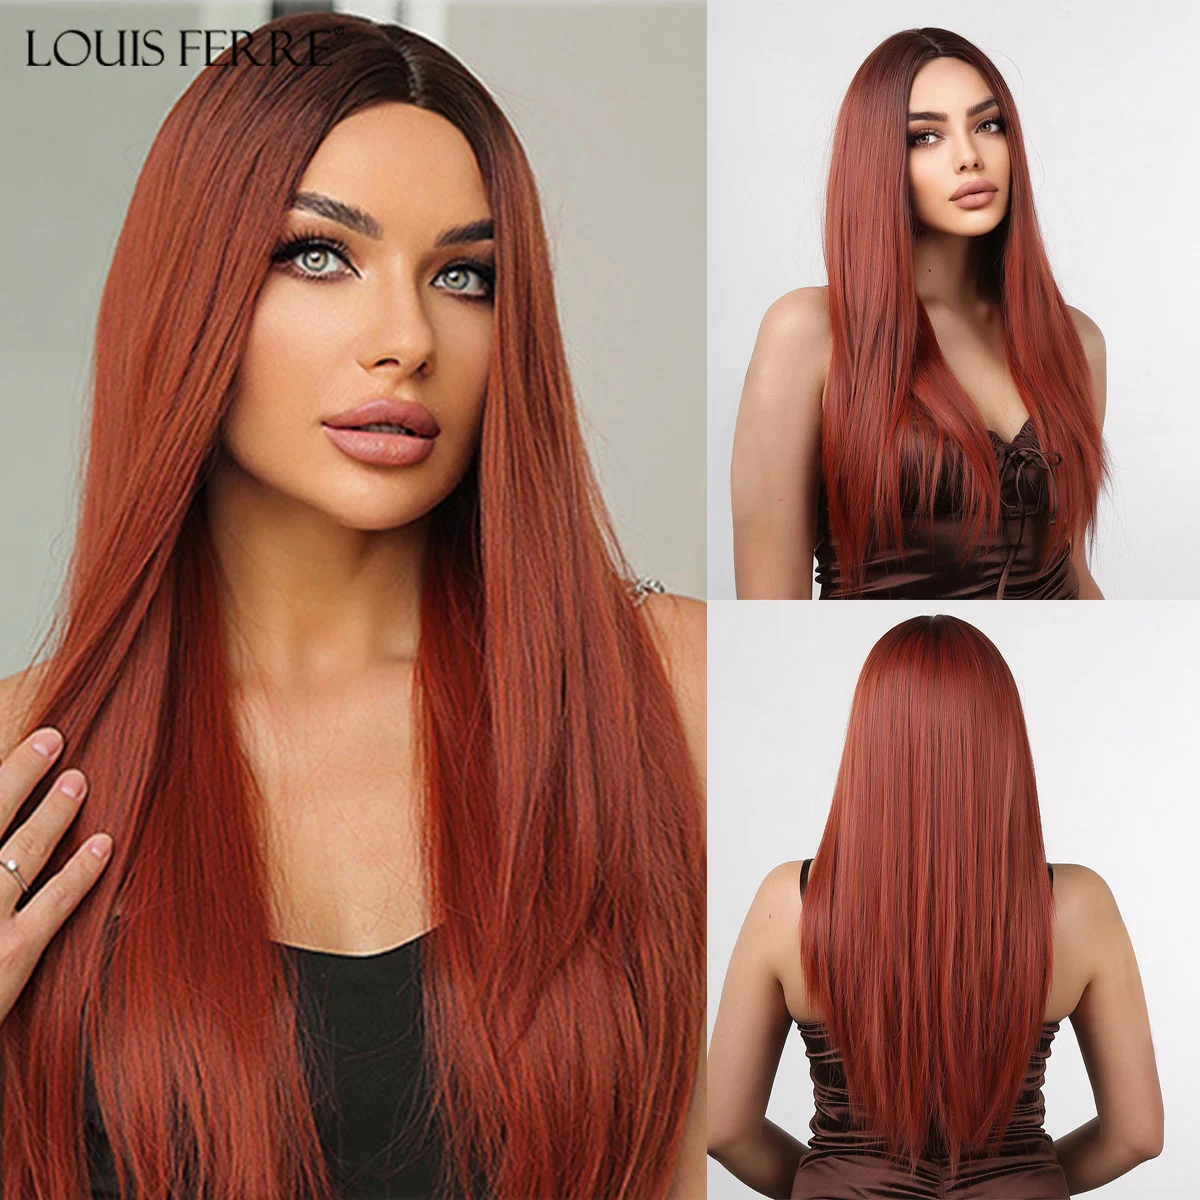 

LOUIS FERRE Long Ginger Straight Synthetic Wigs With Bangs Reddish Brown Hair Wig for Women Daily Cosplay Use Heat Resistant Wig